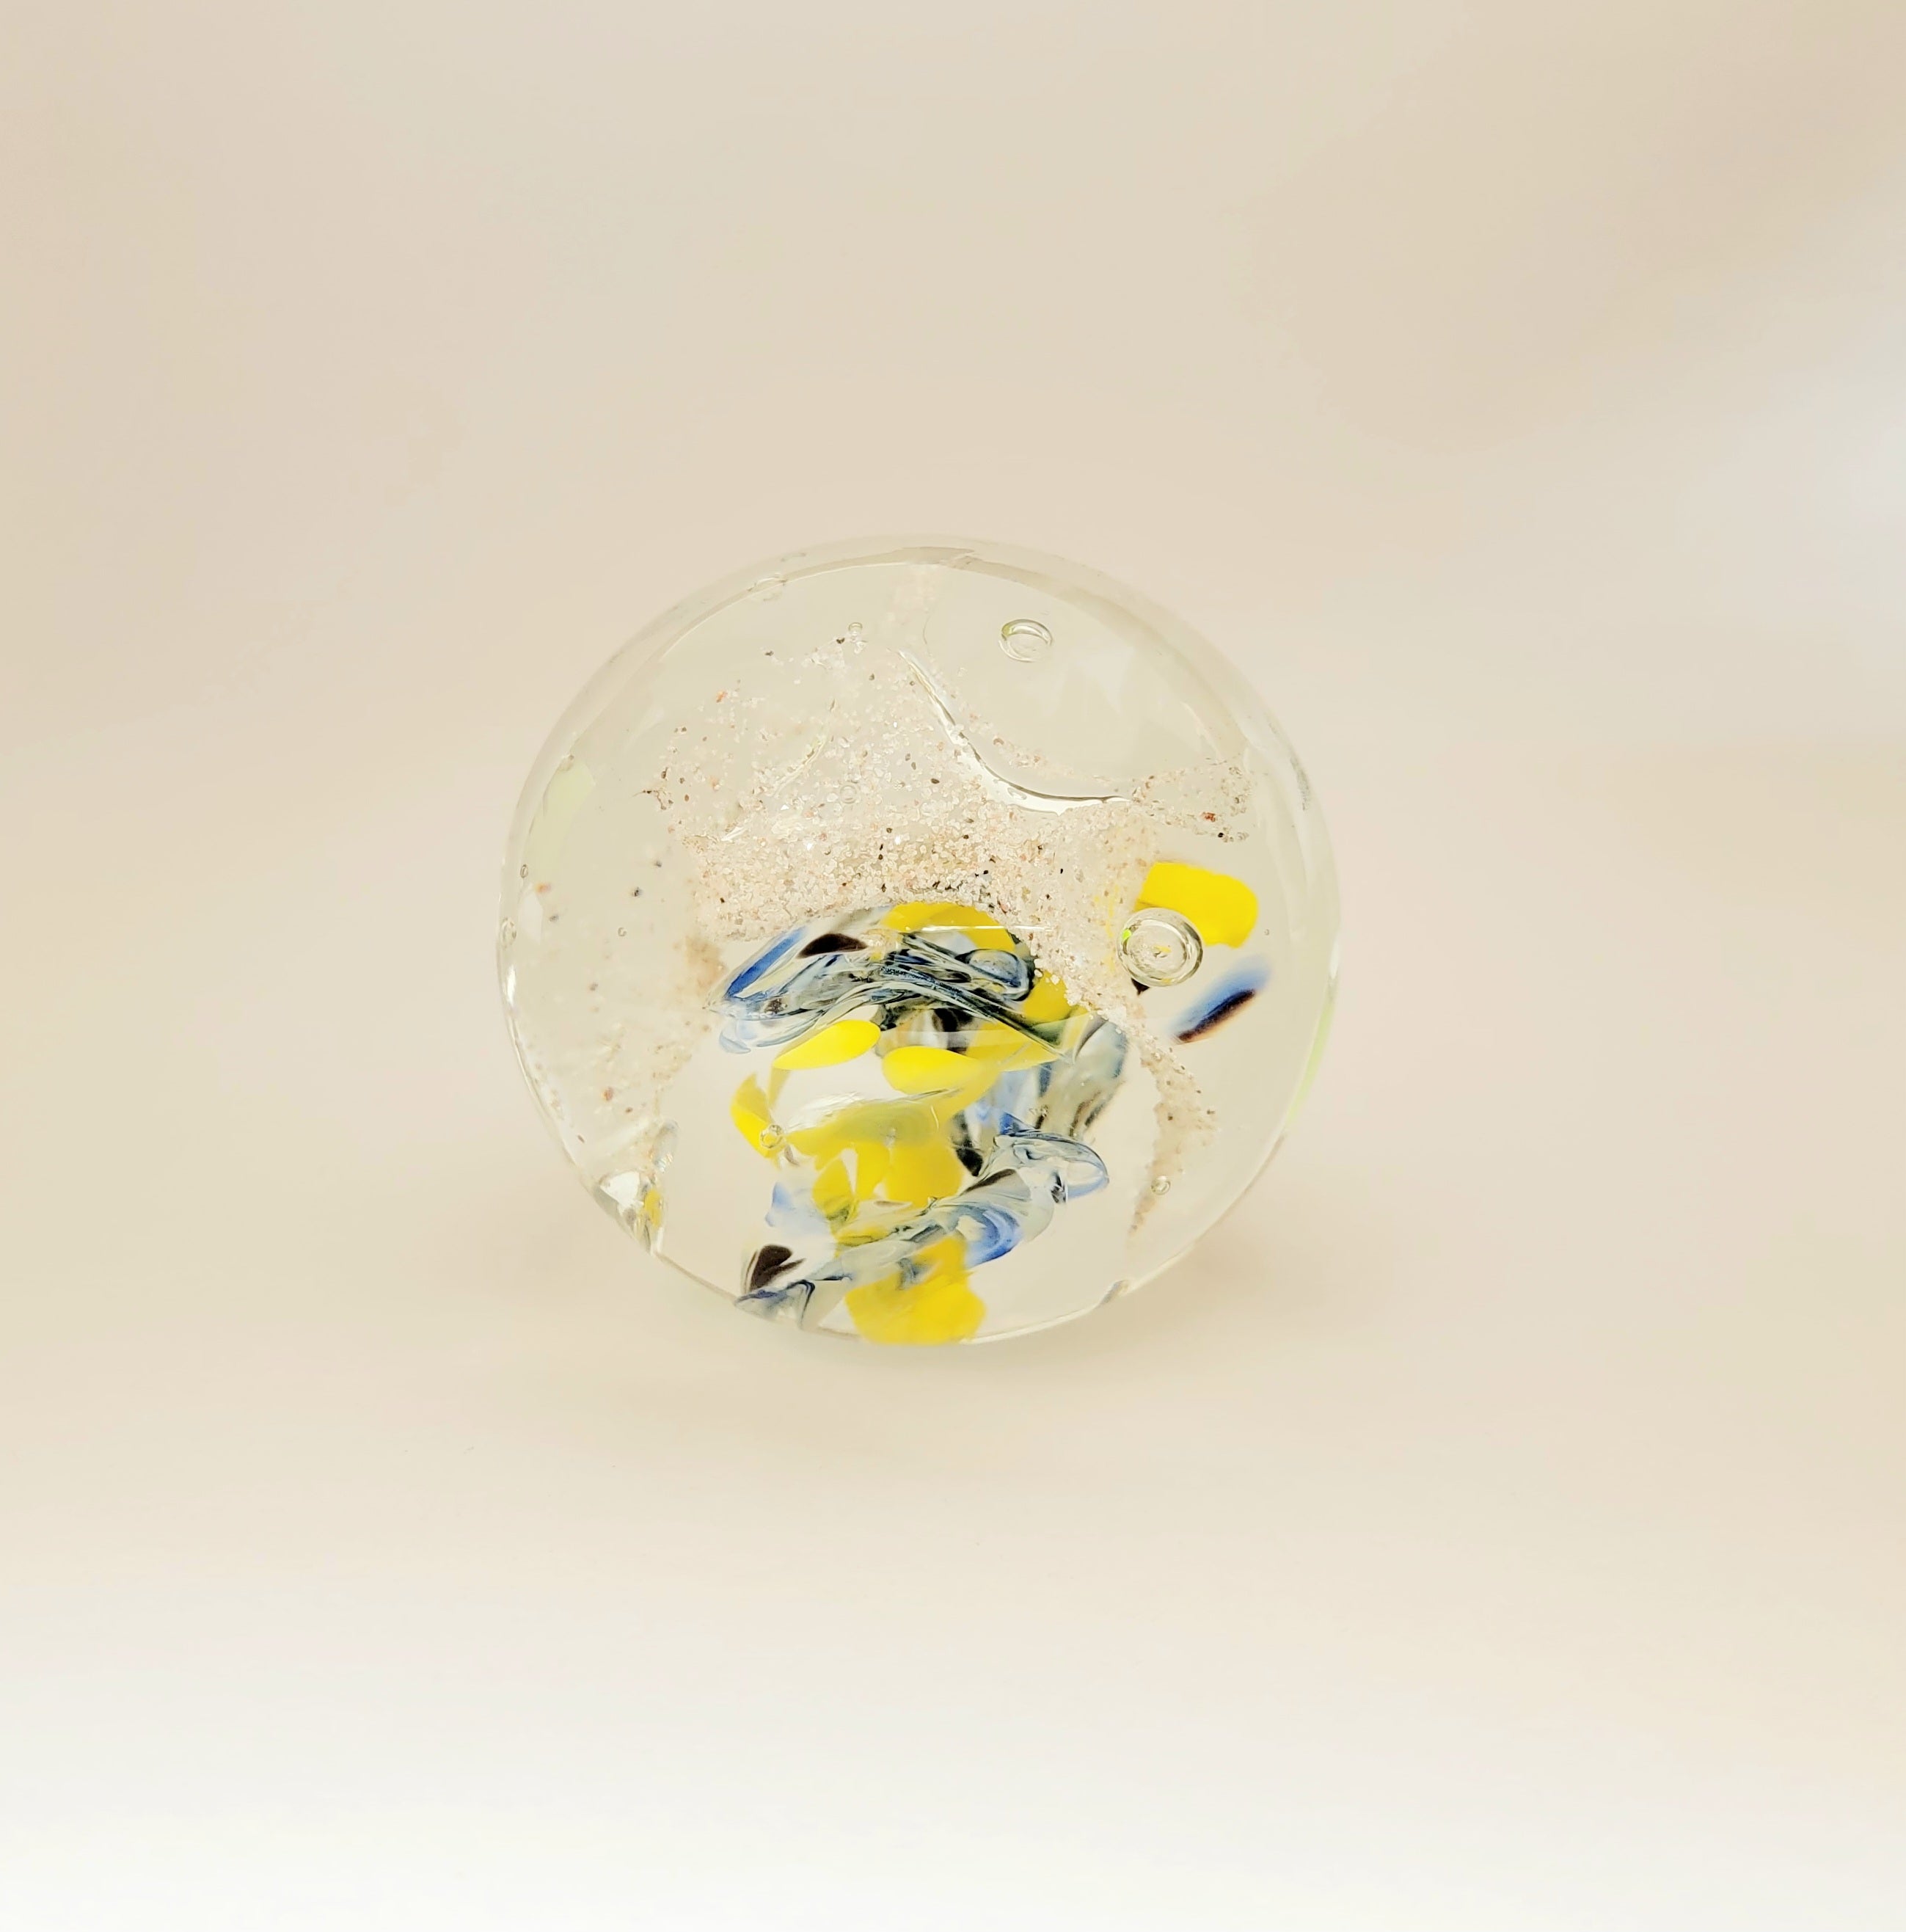 Jersey Shore Sand and Glass Paperweight, Yellow/Blue/Brown